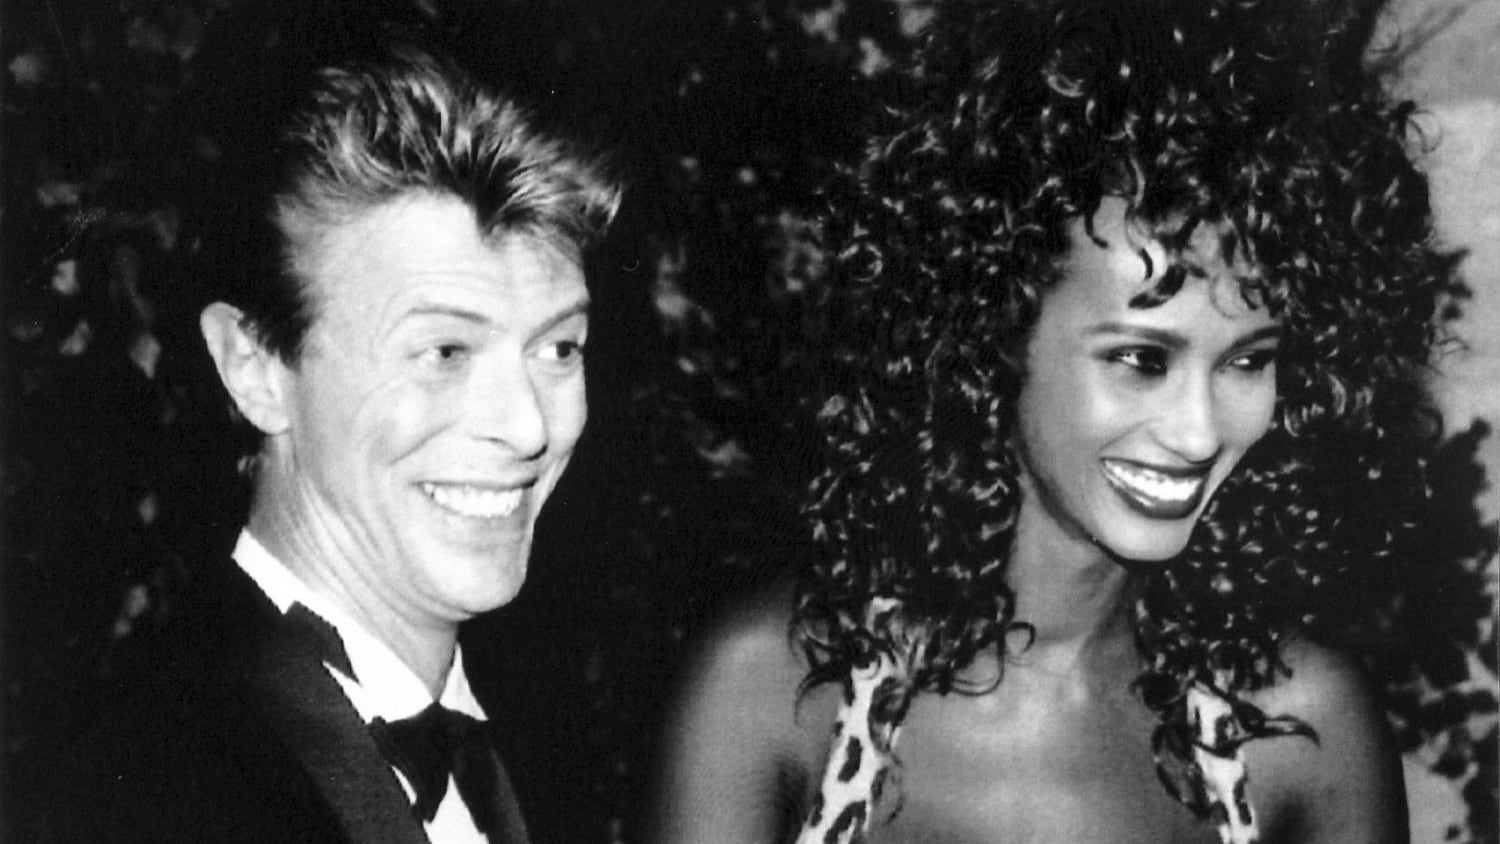 Iman shares sweet photo on anniversary with David Bowie